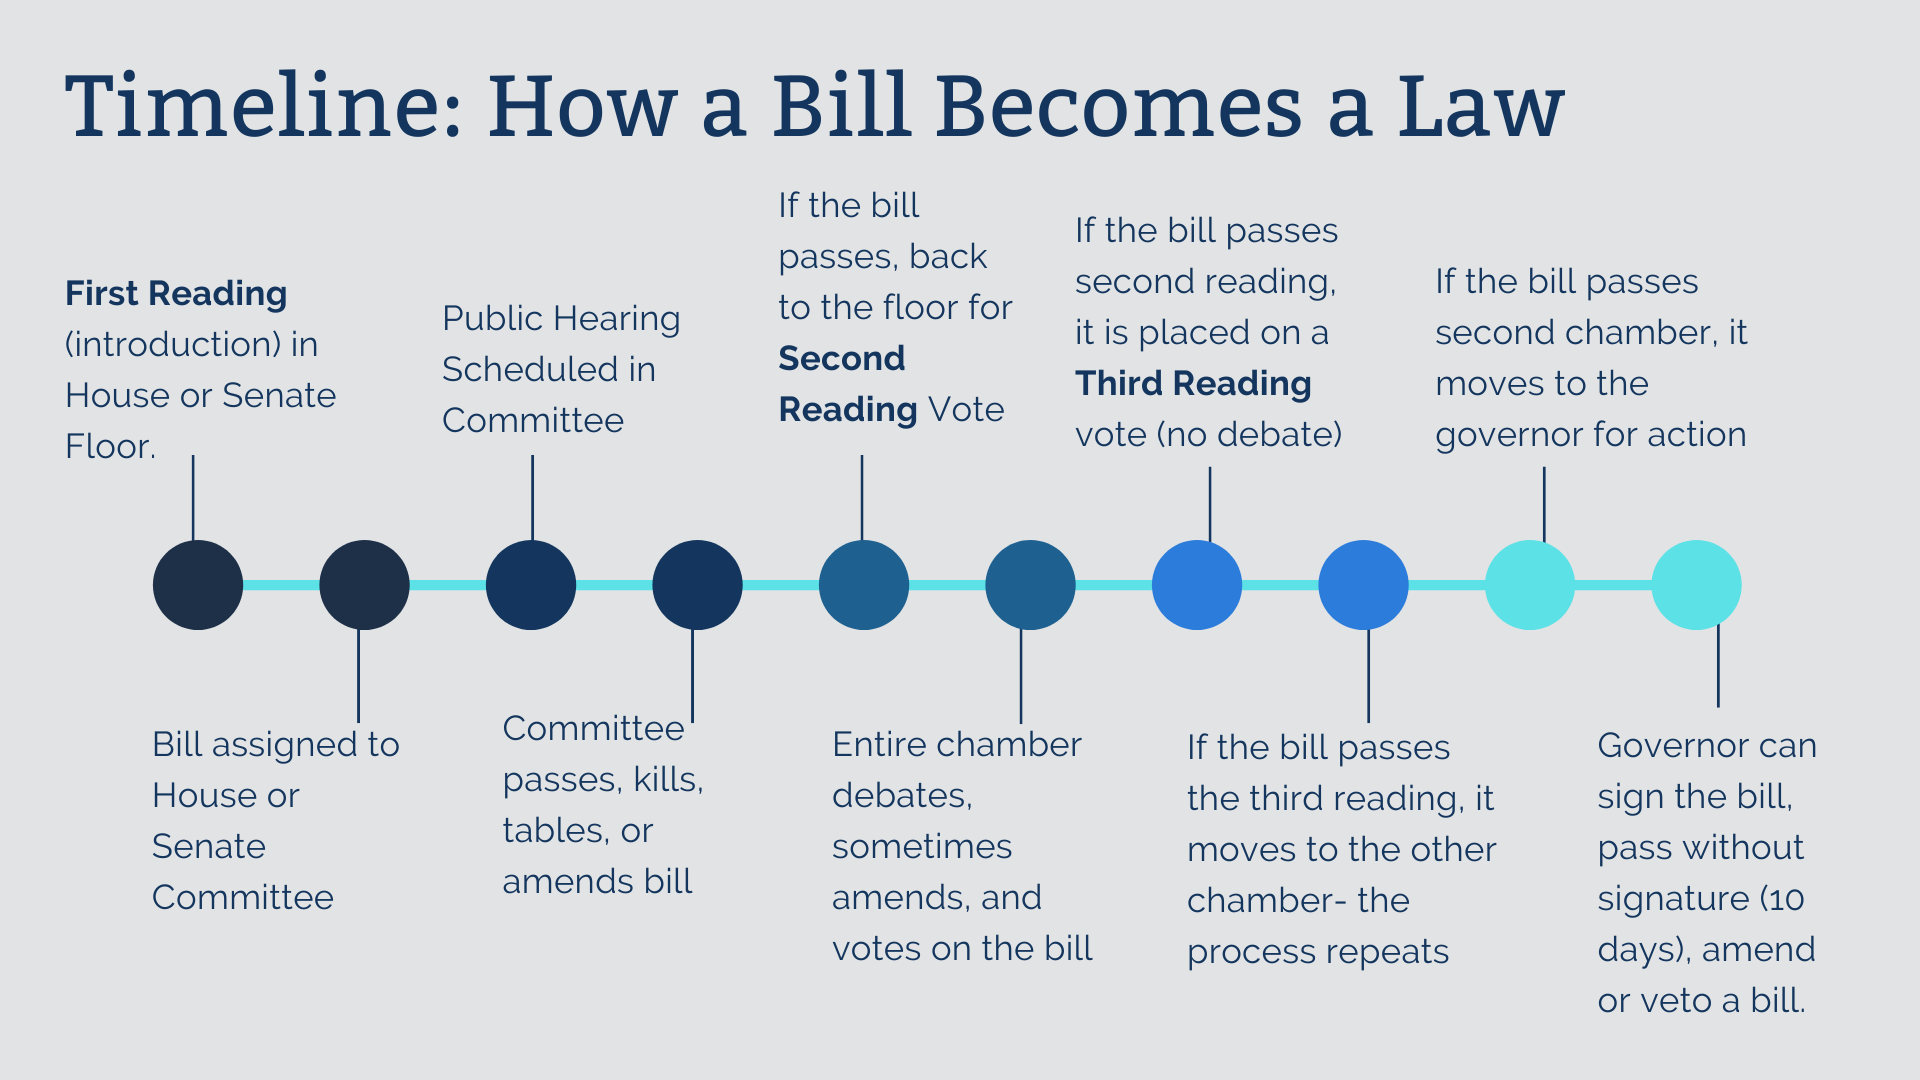 Timeline: How a Bill Becomes a Law